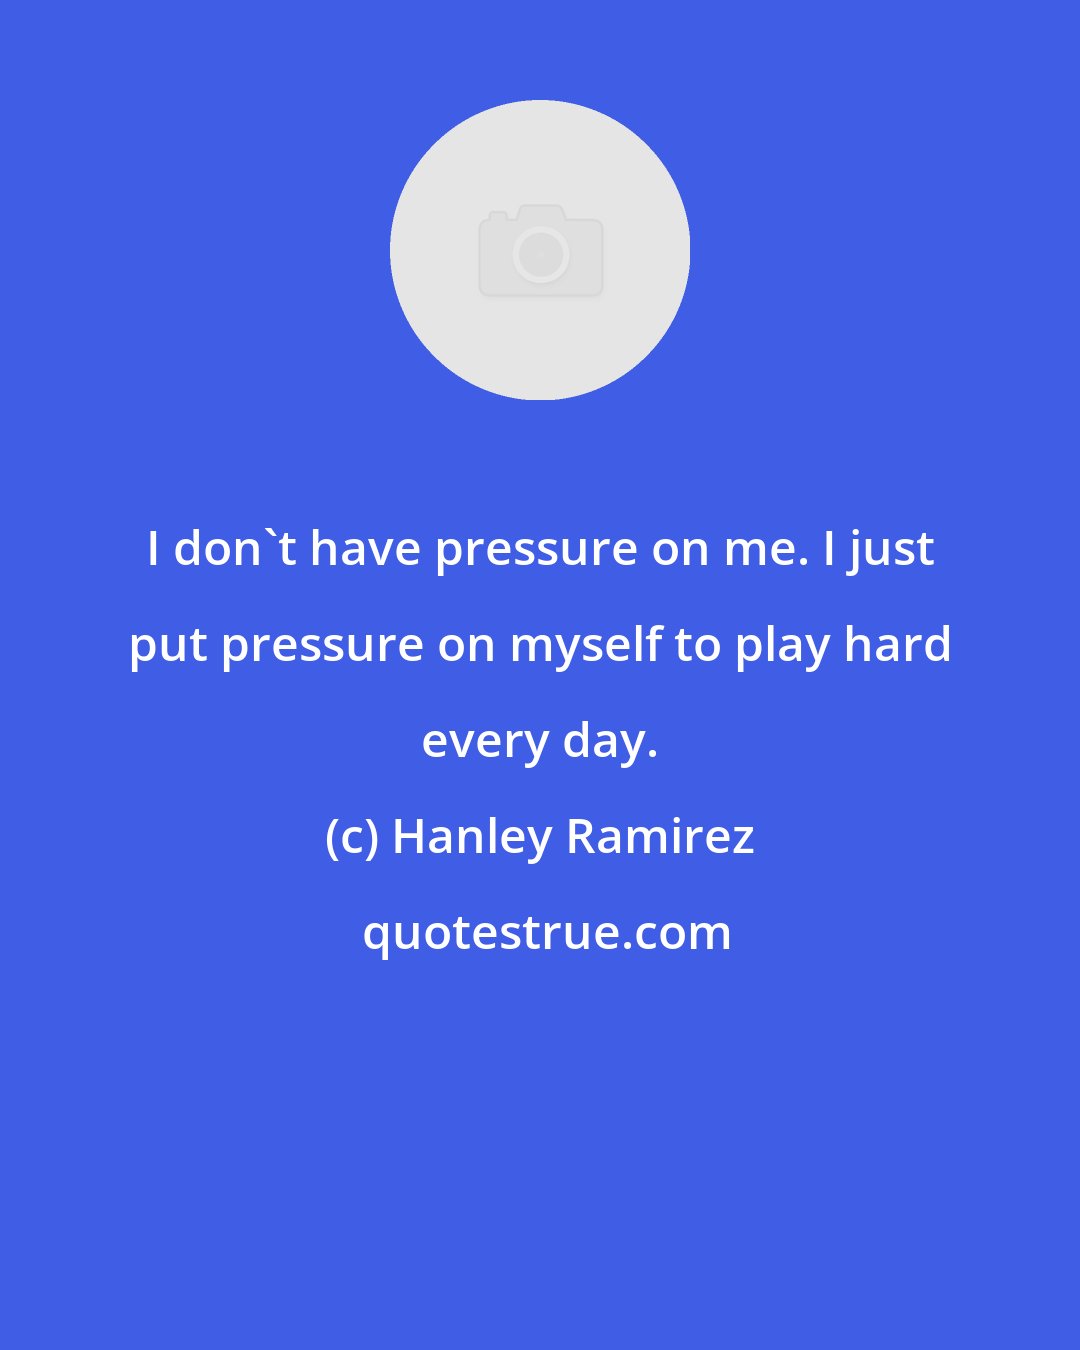 Hanley Ramirez: I don't have pressure on me. I just put pressure on myself to play hard every day.